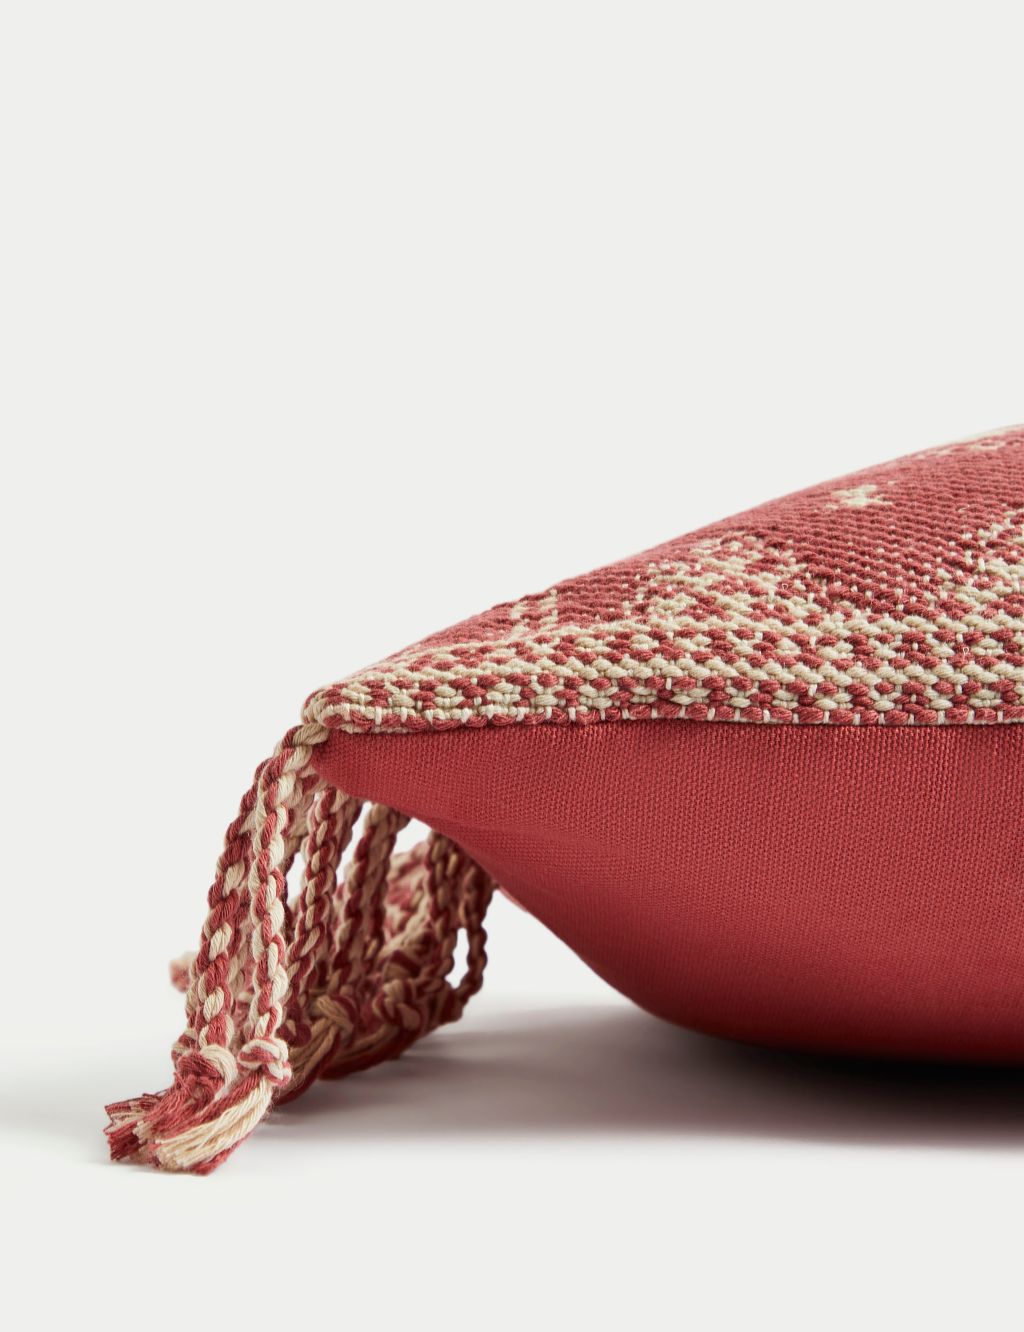 Jaipur Bassi Woven Outdoor Bolster Cushion 1 of 5